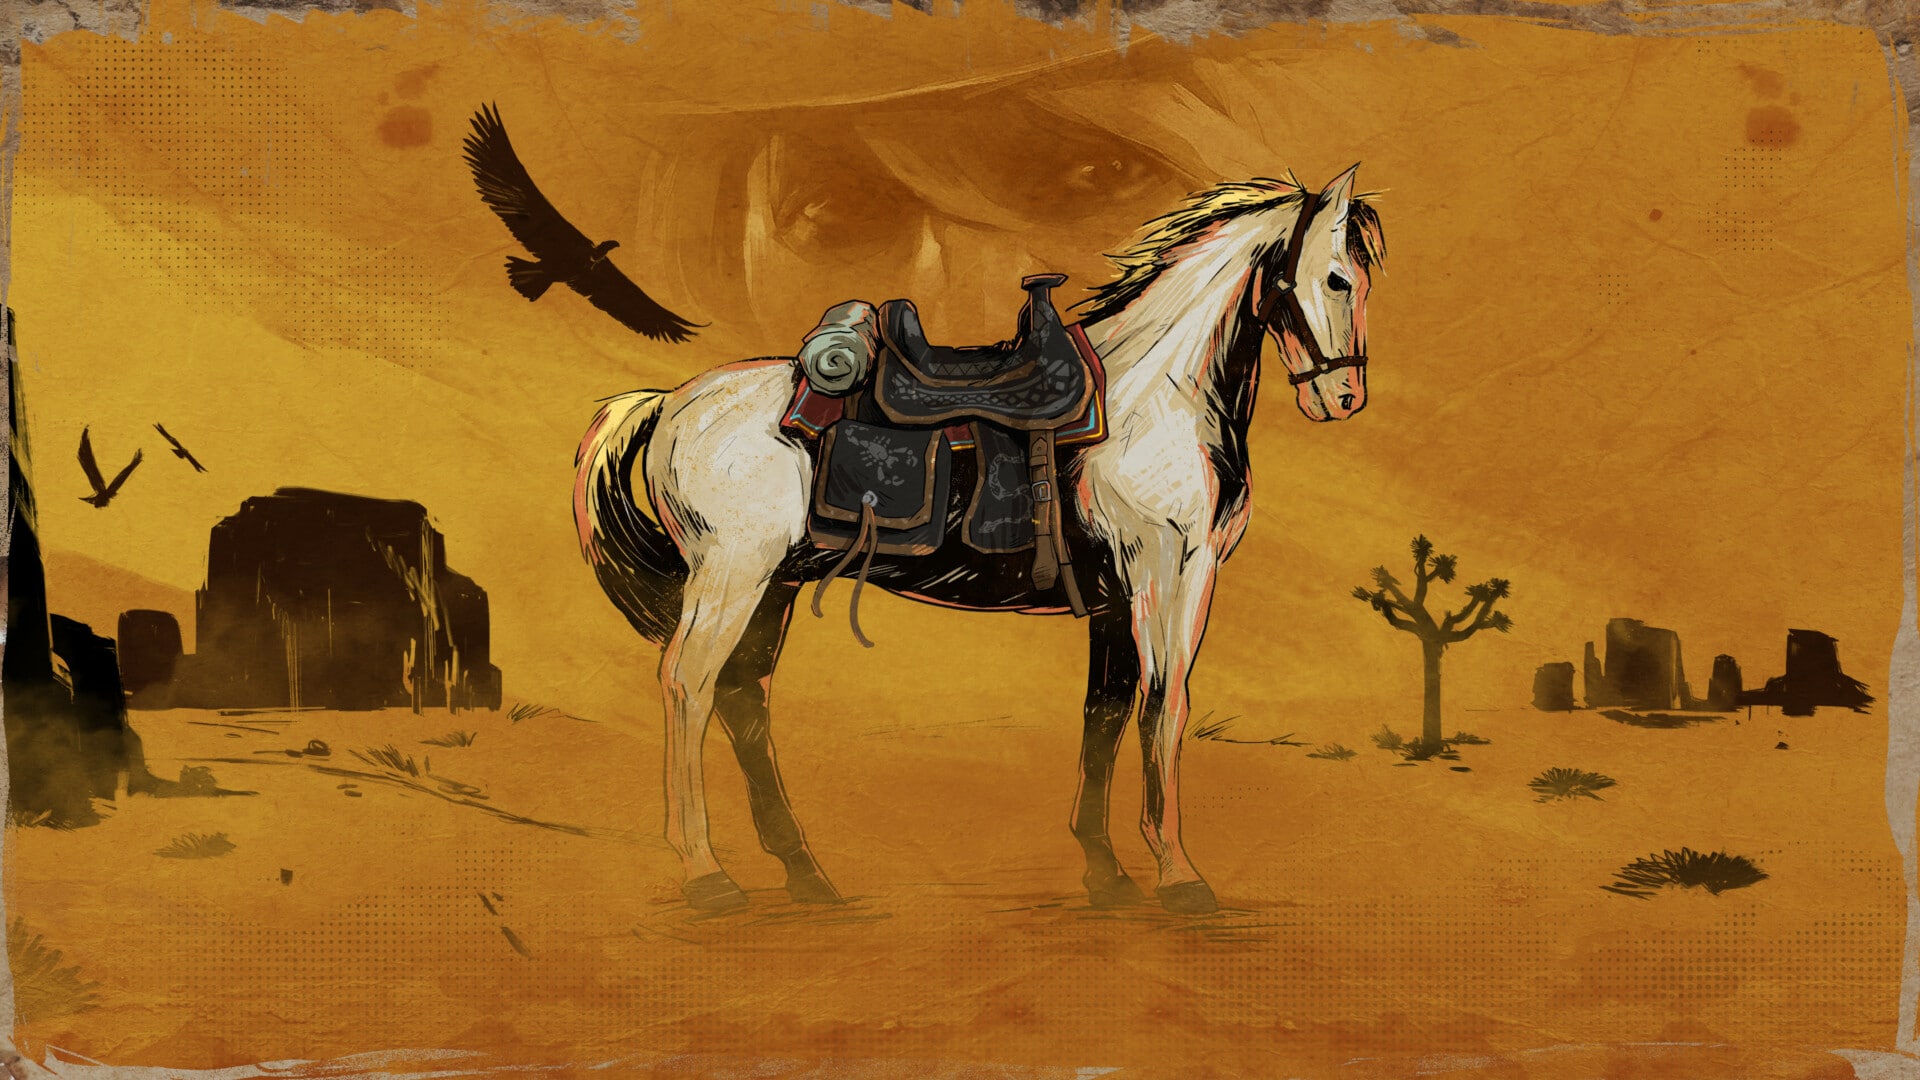 Weird West, gameplay, release date, video, trailer, PlayStation, Xbox, PC, Calamity